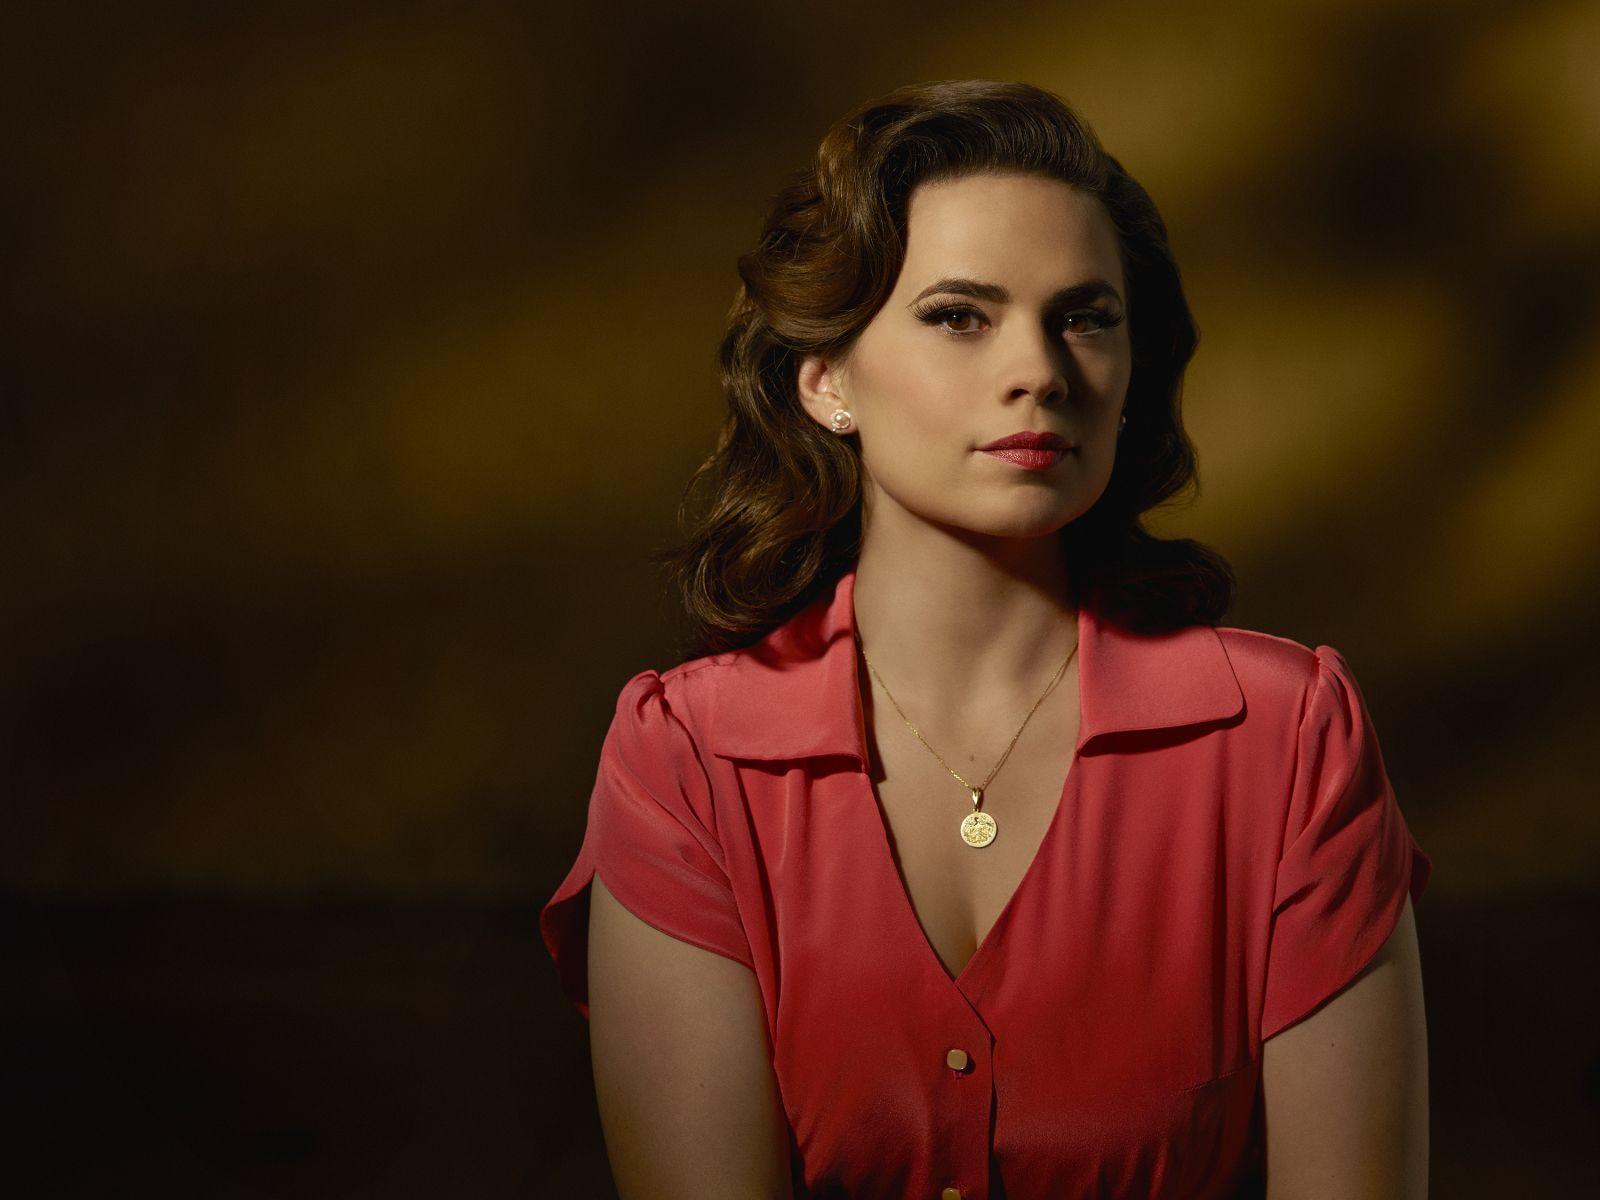 Avengers Endgame reminds us we need more Peggy Carter